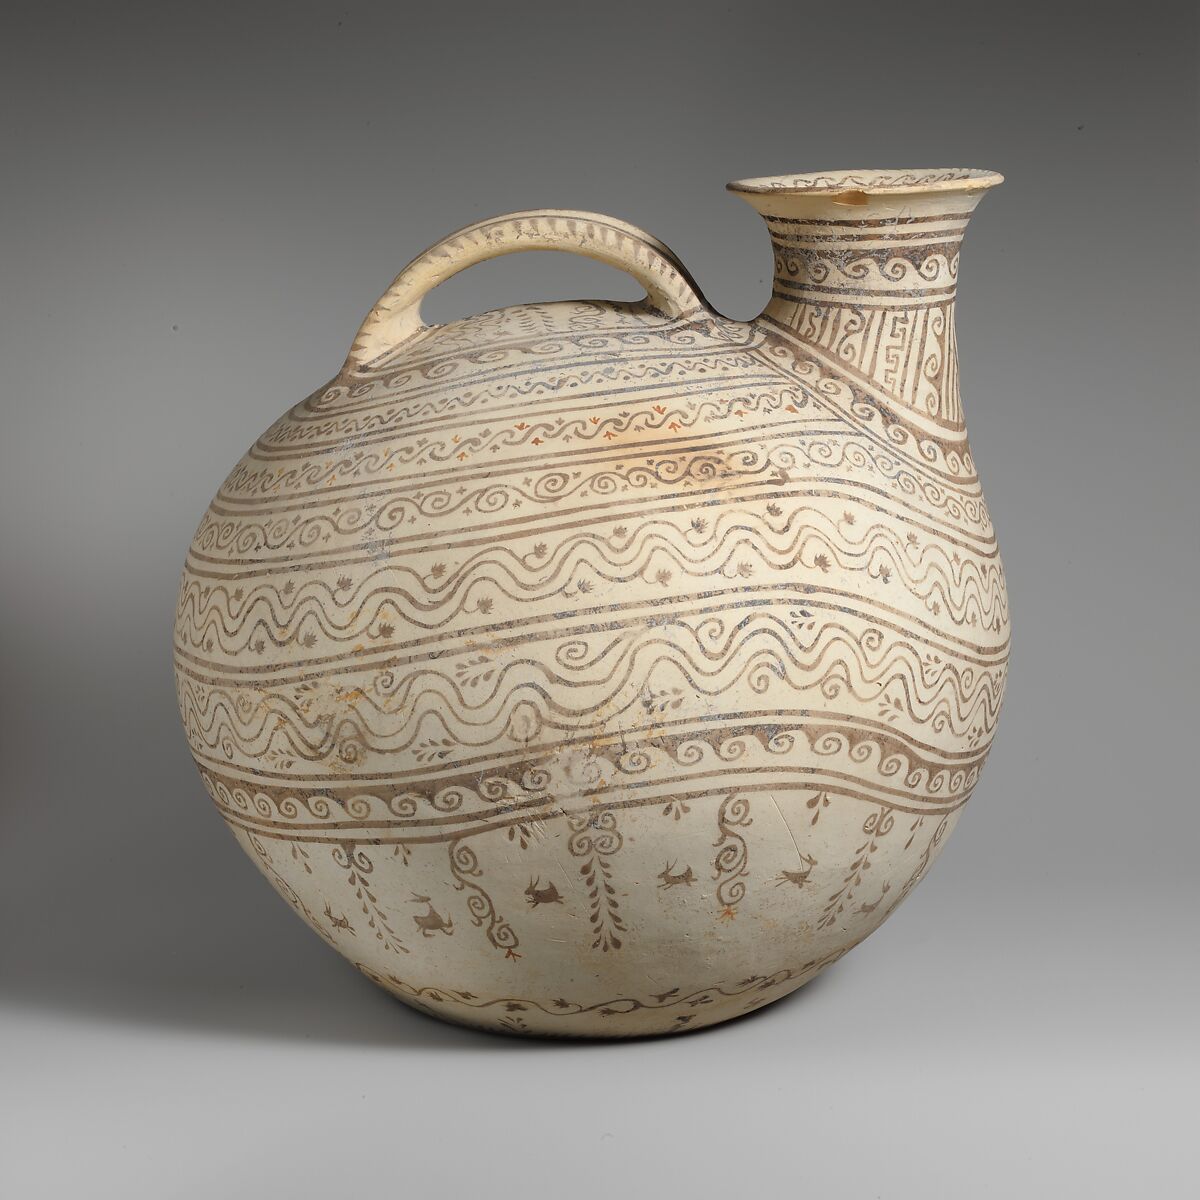 Terracotta askos (flask with a spout and handle over the top), Terracotta, Native Italic, Daunian, Canosan 